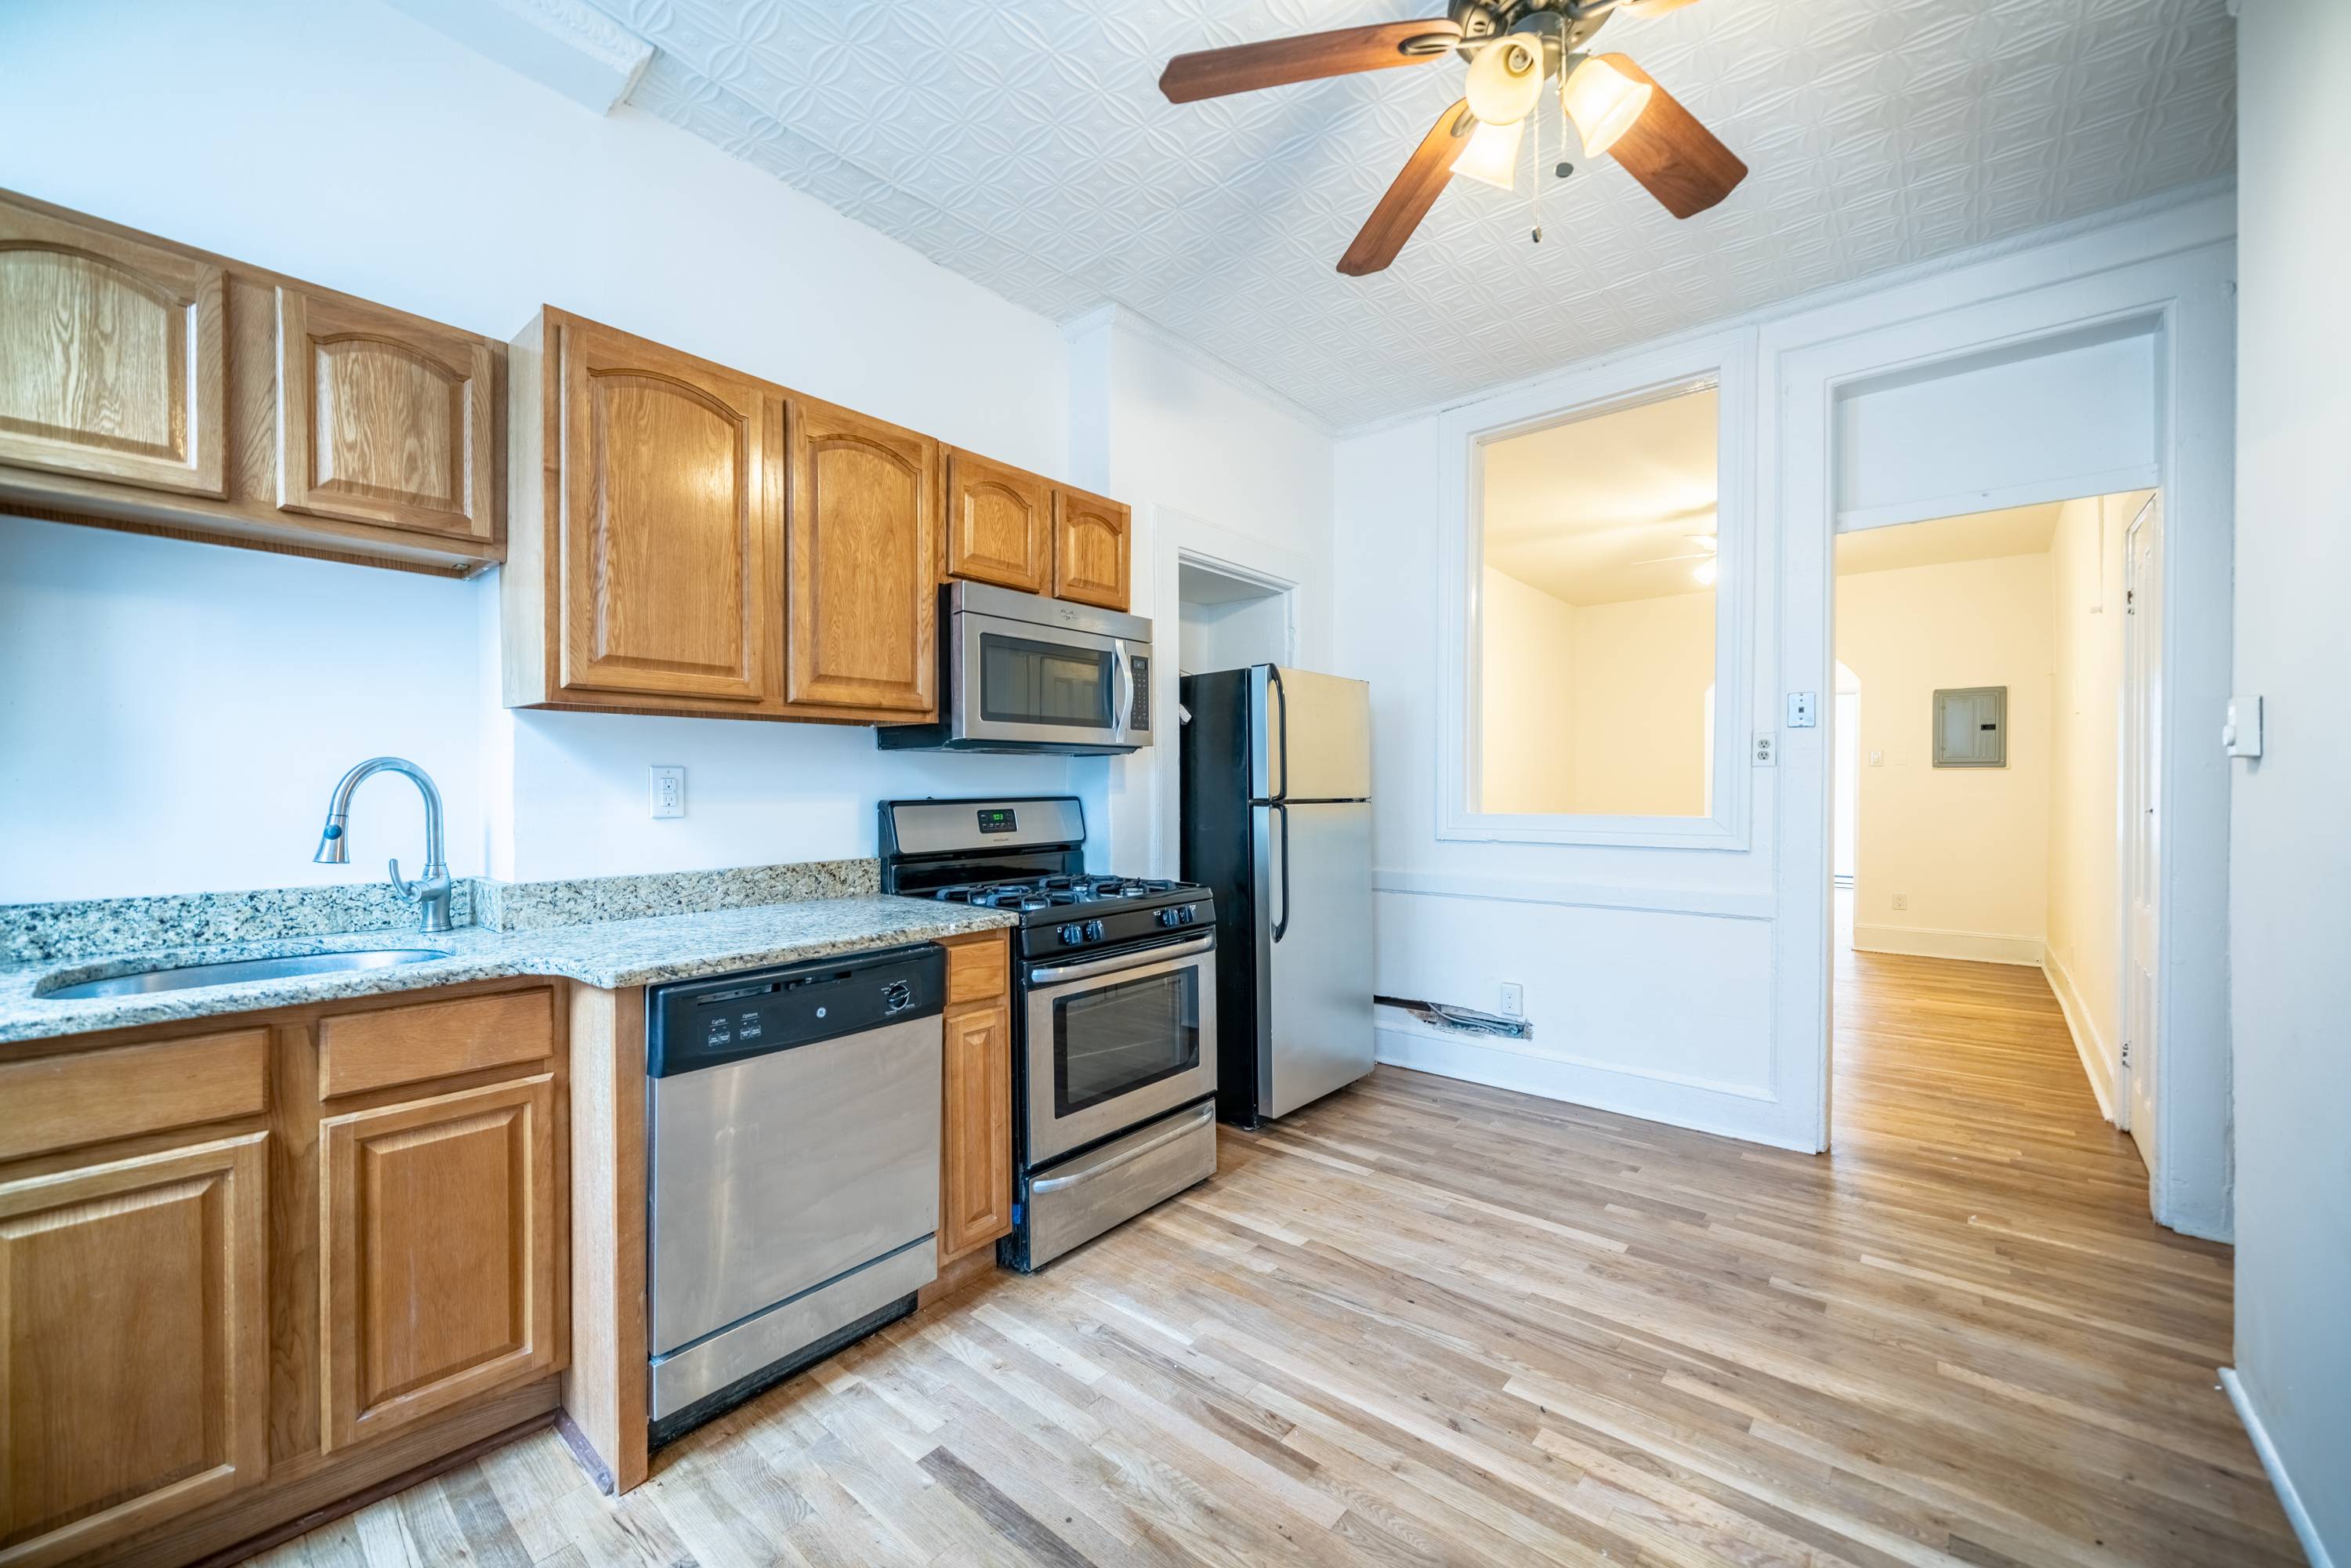 Beautiful Open 1BR Apartment located on Park Ave in Beautiful Downtown Hoboken NJ!  Brand New Updated Bathroom!  Moments to the Path Train and Washington Street!  No Broker Fees!